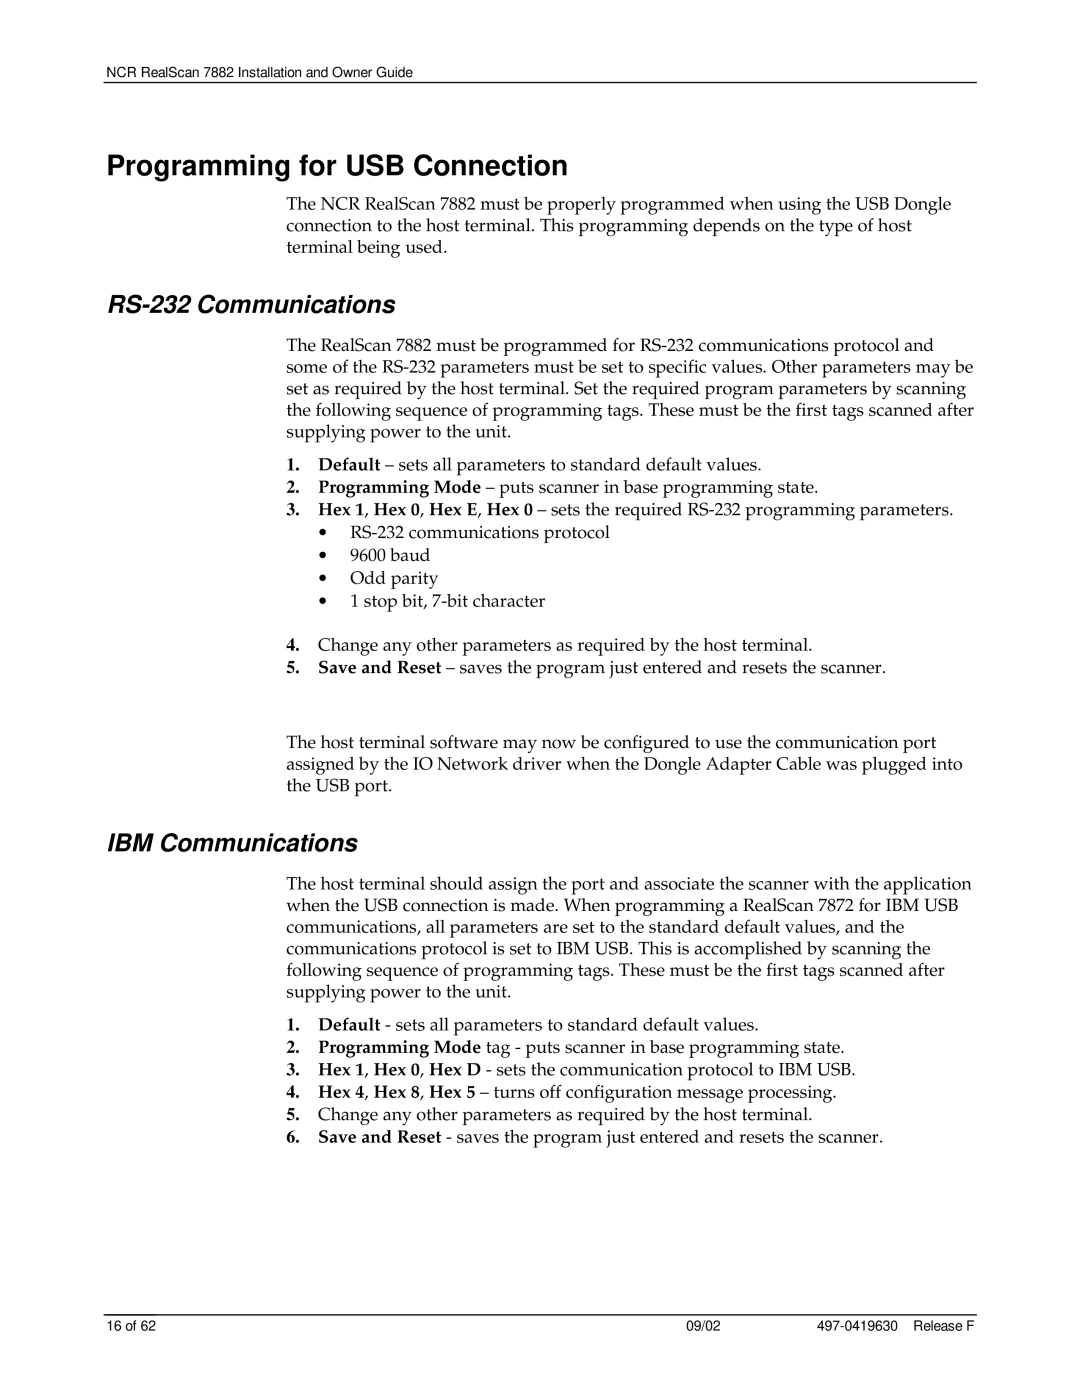 NCR 7882 manual Programming for USB Connection, RS-232 Communications, IBM Communications 